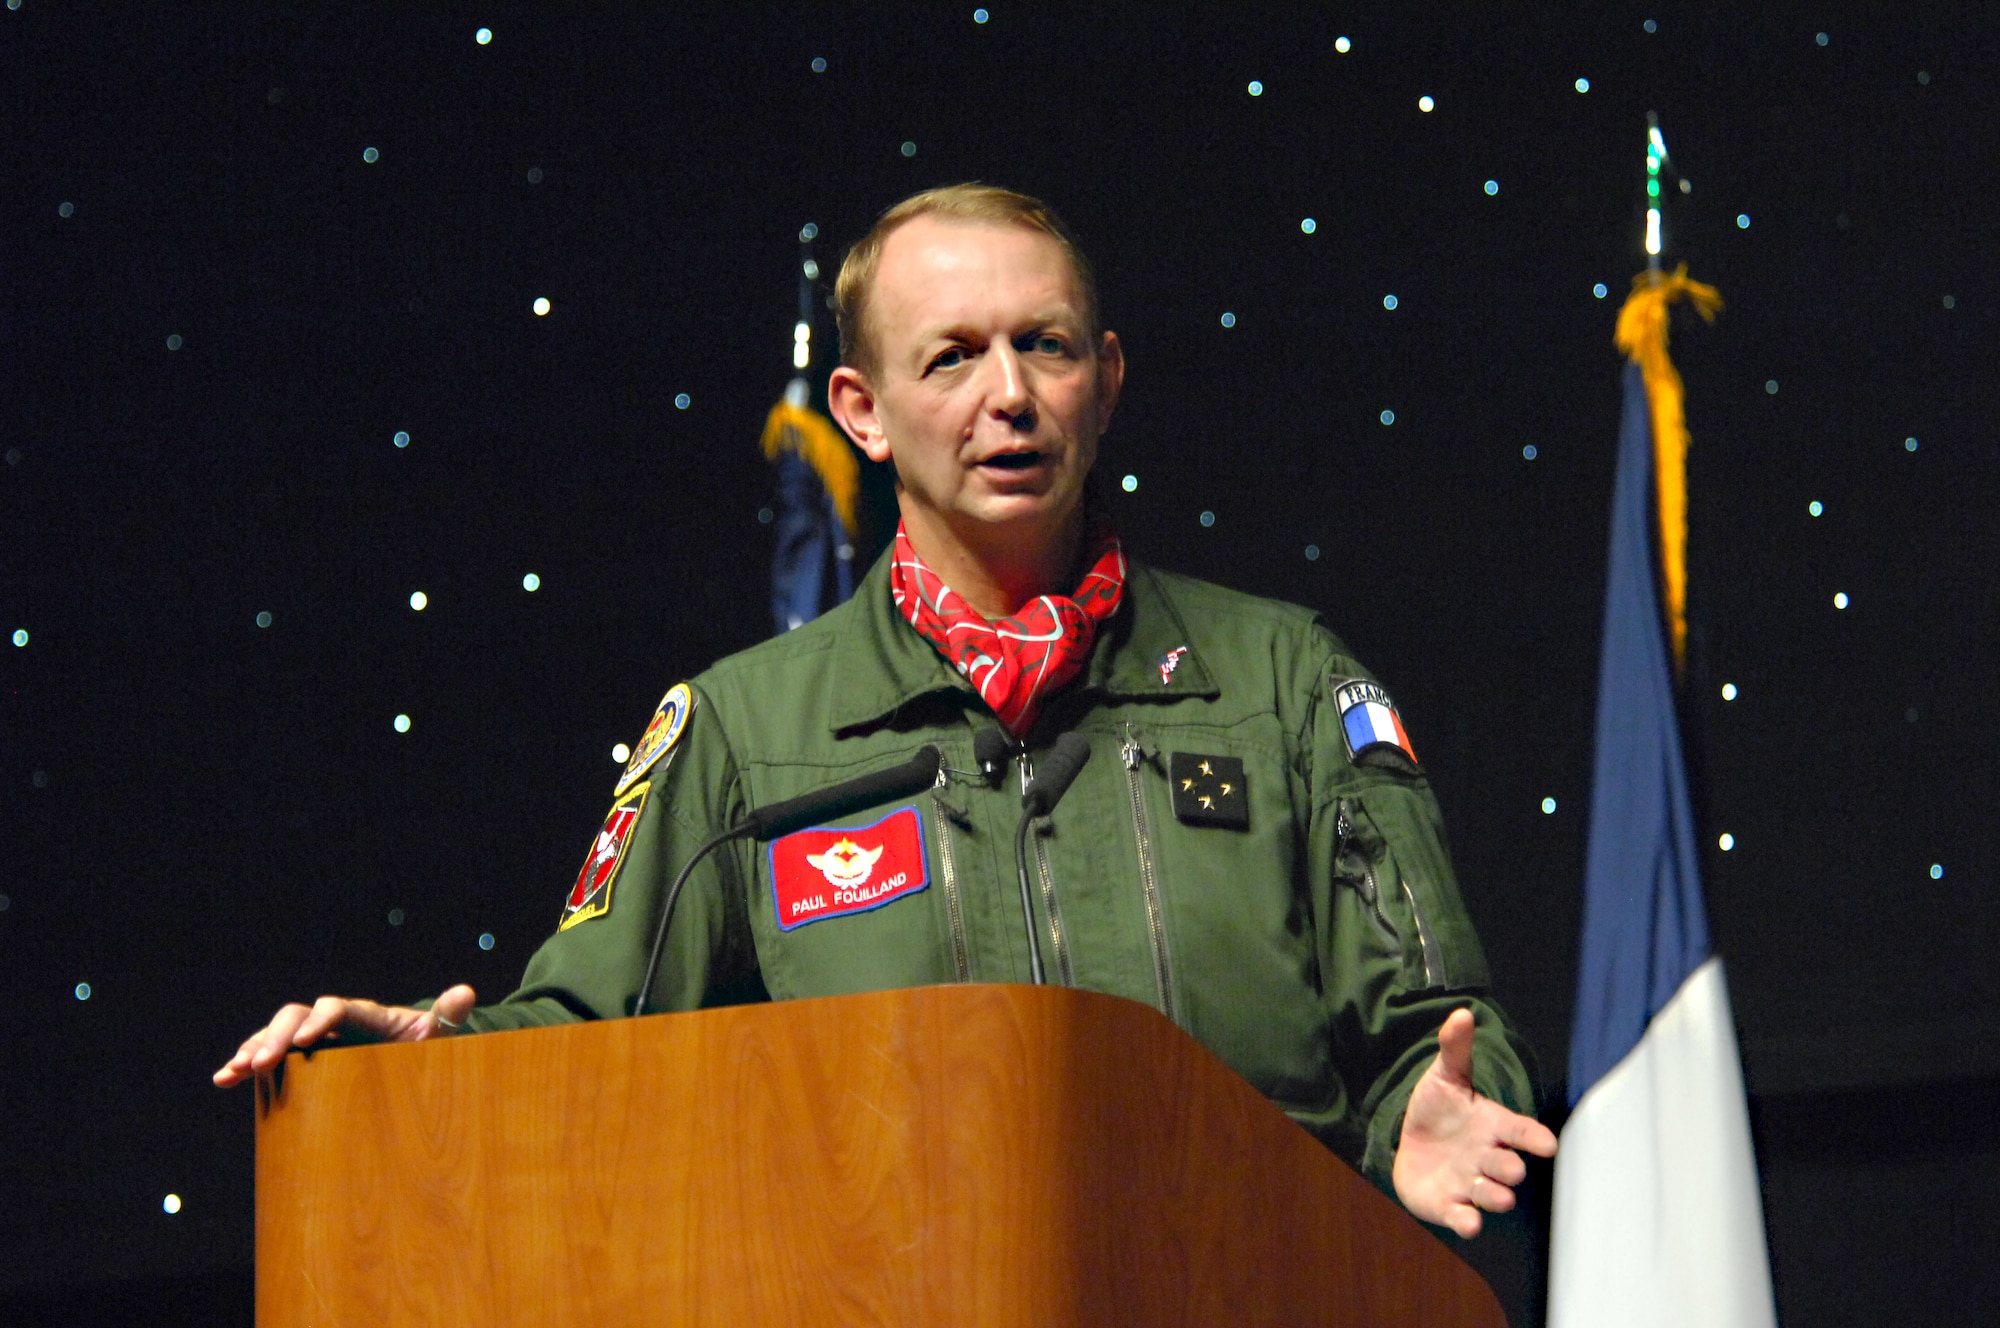 SHREVEPORT, La. -- Lt. Gen. Paul Fouilland, French Strategic Air Forces commander-in-chief, explains the French nuclear deterrence mission at the Air Force Global Strike Command Technology and Innovation Symposium at the Shreveport Convention Center in downtown Shreveport, La. during part of his visit to AFGSC, Nov 14 -18.  General Fouilland and a delegation of French military officers also toured a B-2 Spirit and a B-52 Stratofortress bomber, met with weapons system experts, and attended Global Strike Challenge activities. (U.S. Air Force photo/Master Sgt. Corey A. Clements)